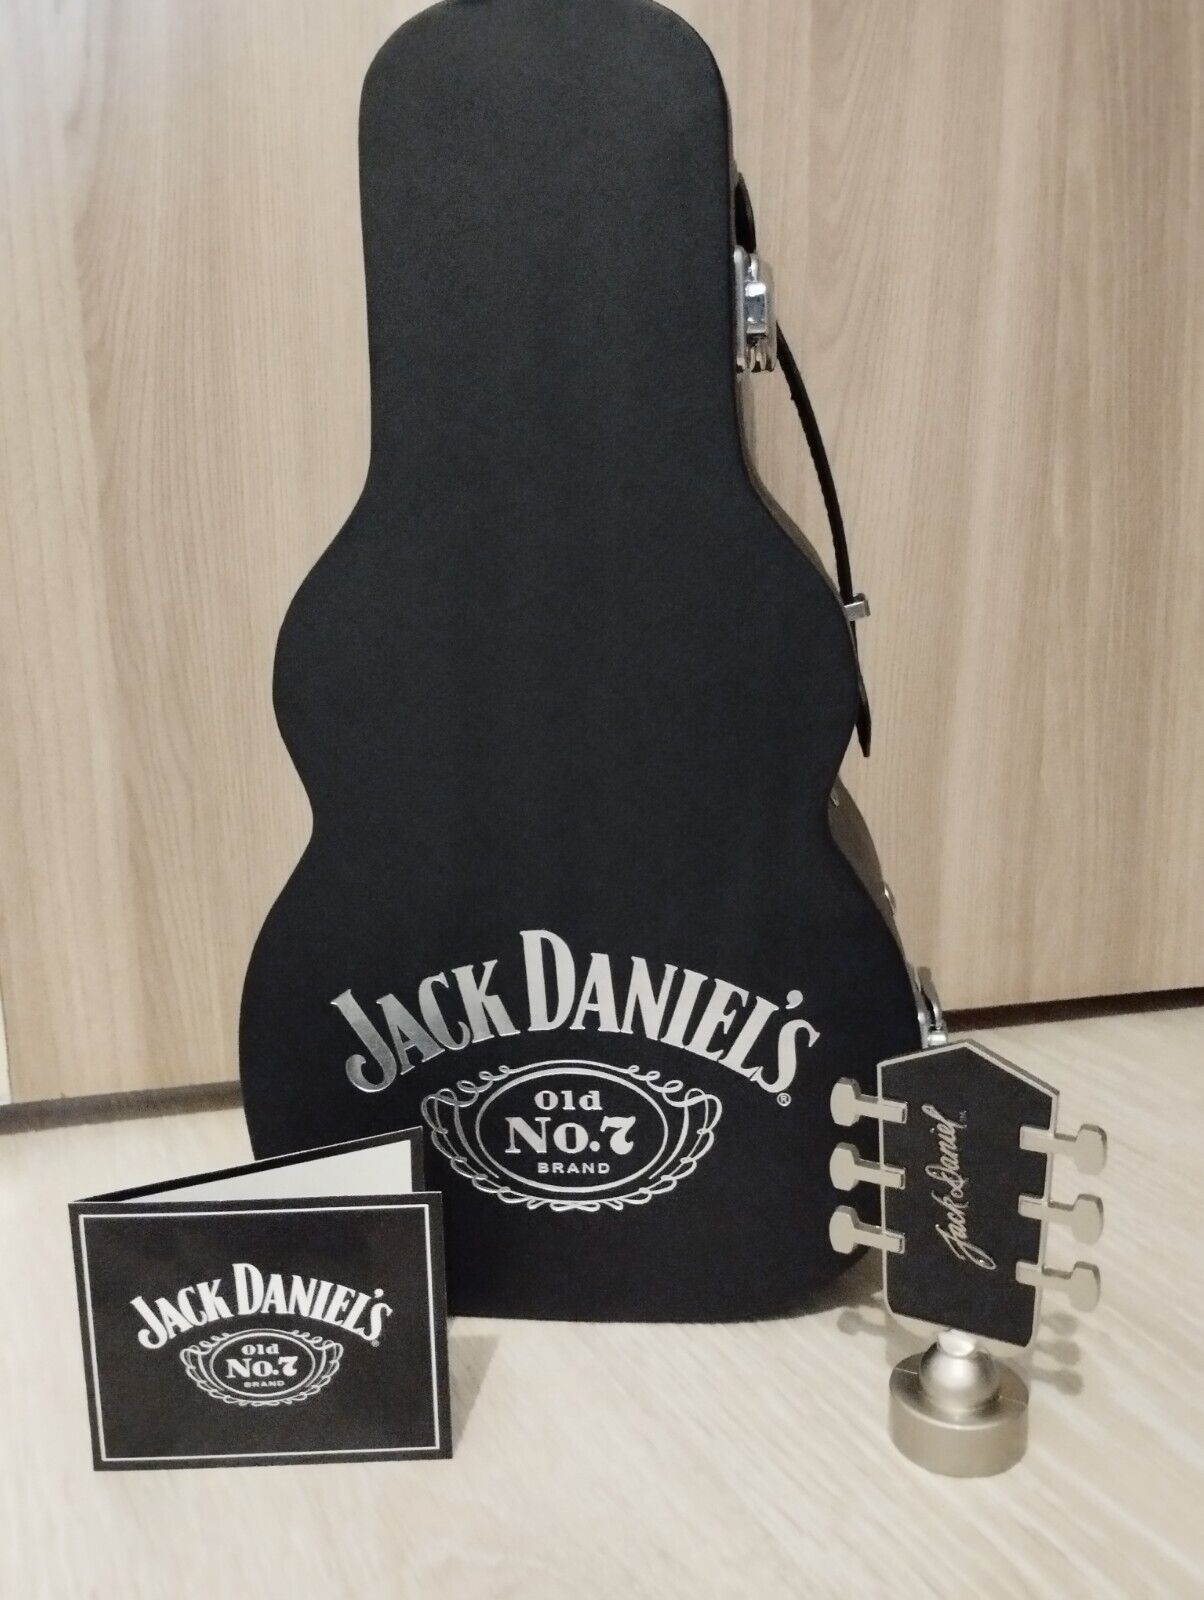 Jack Daniel's Whiskey Limited Edition Guitar Case with Bottle Stopper+VIDEO